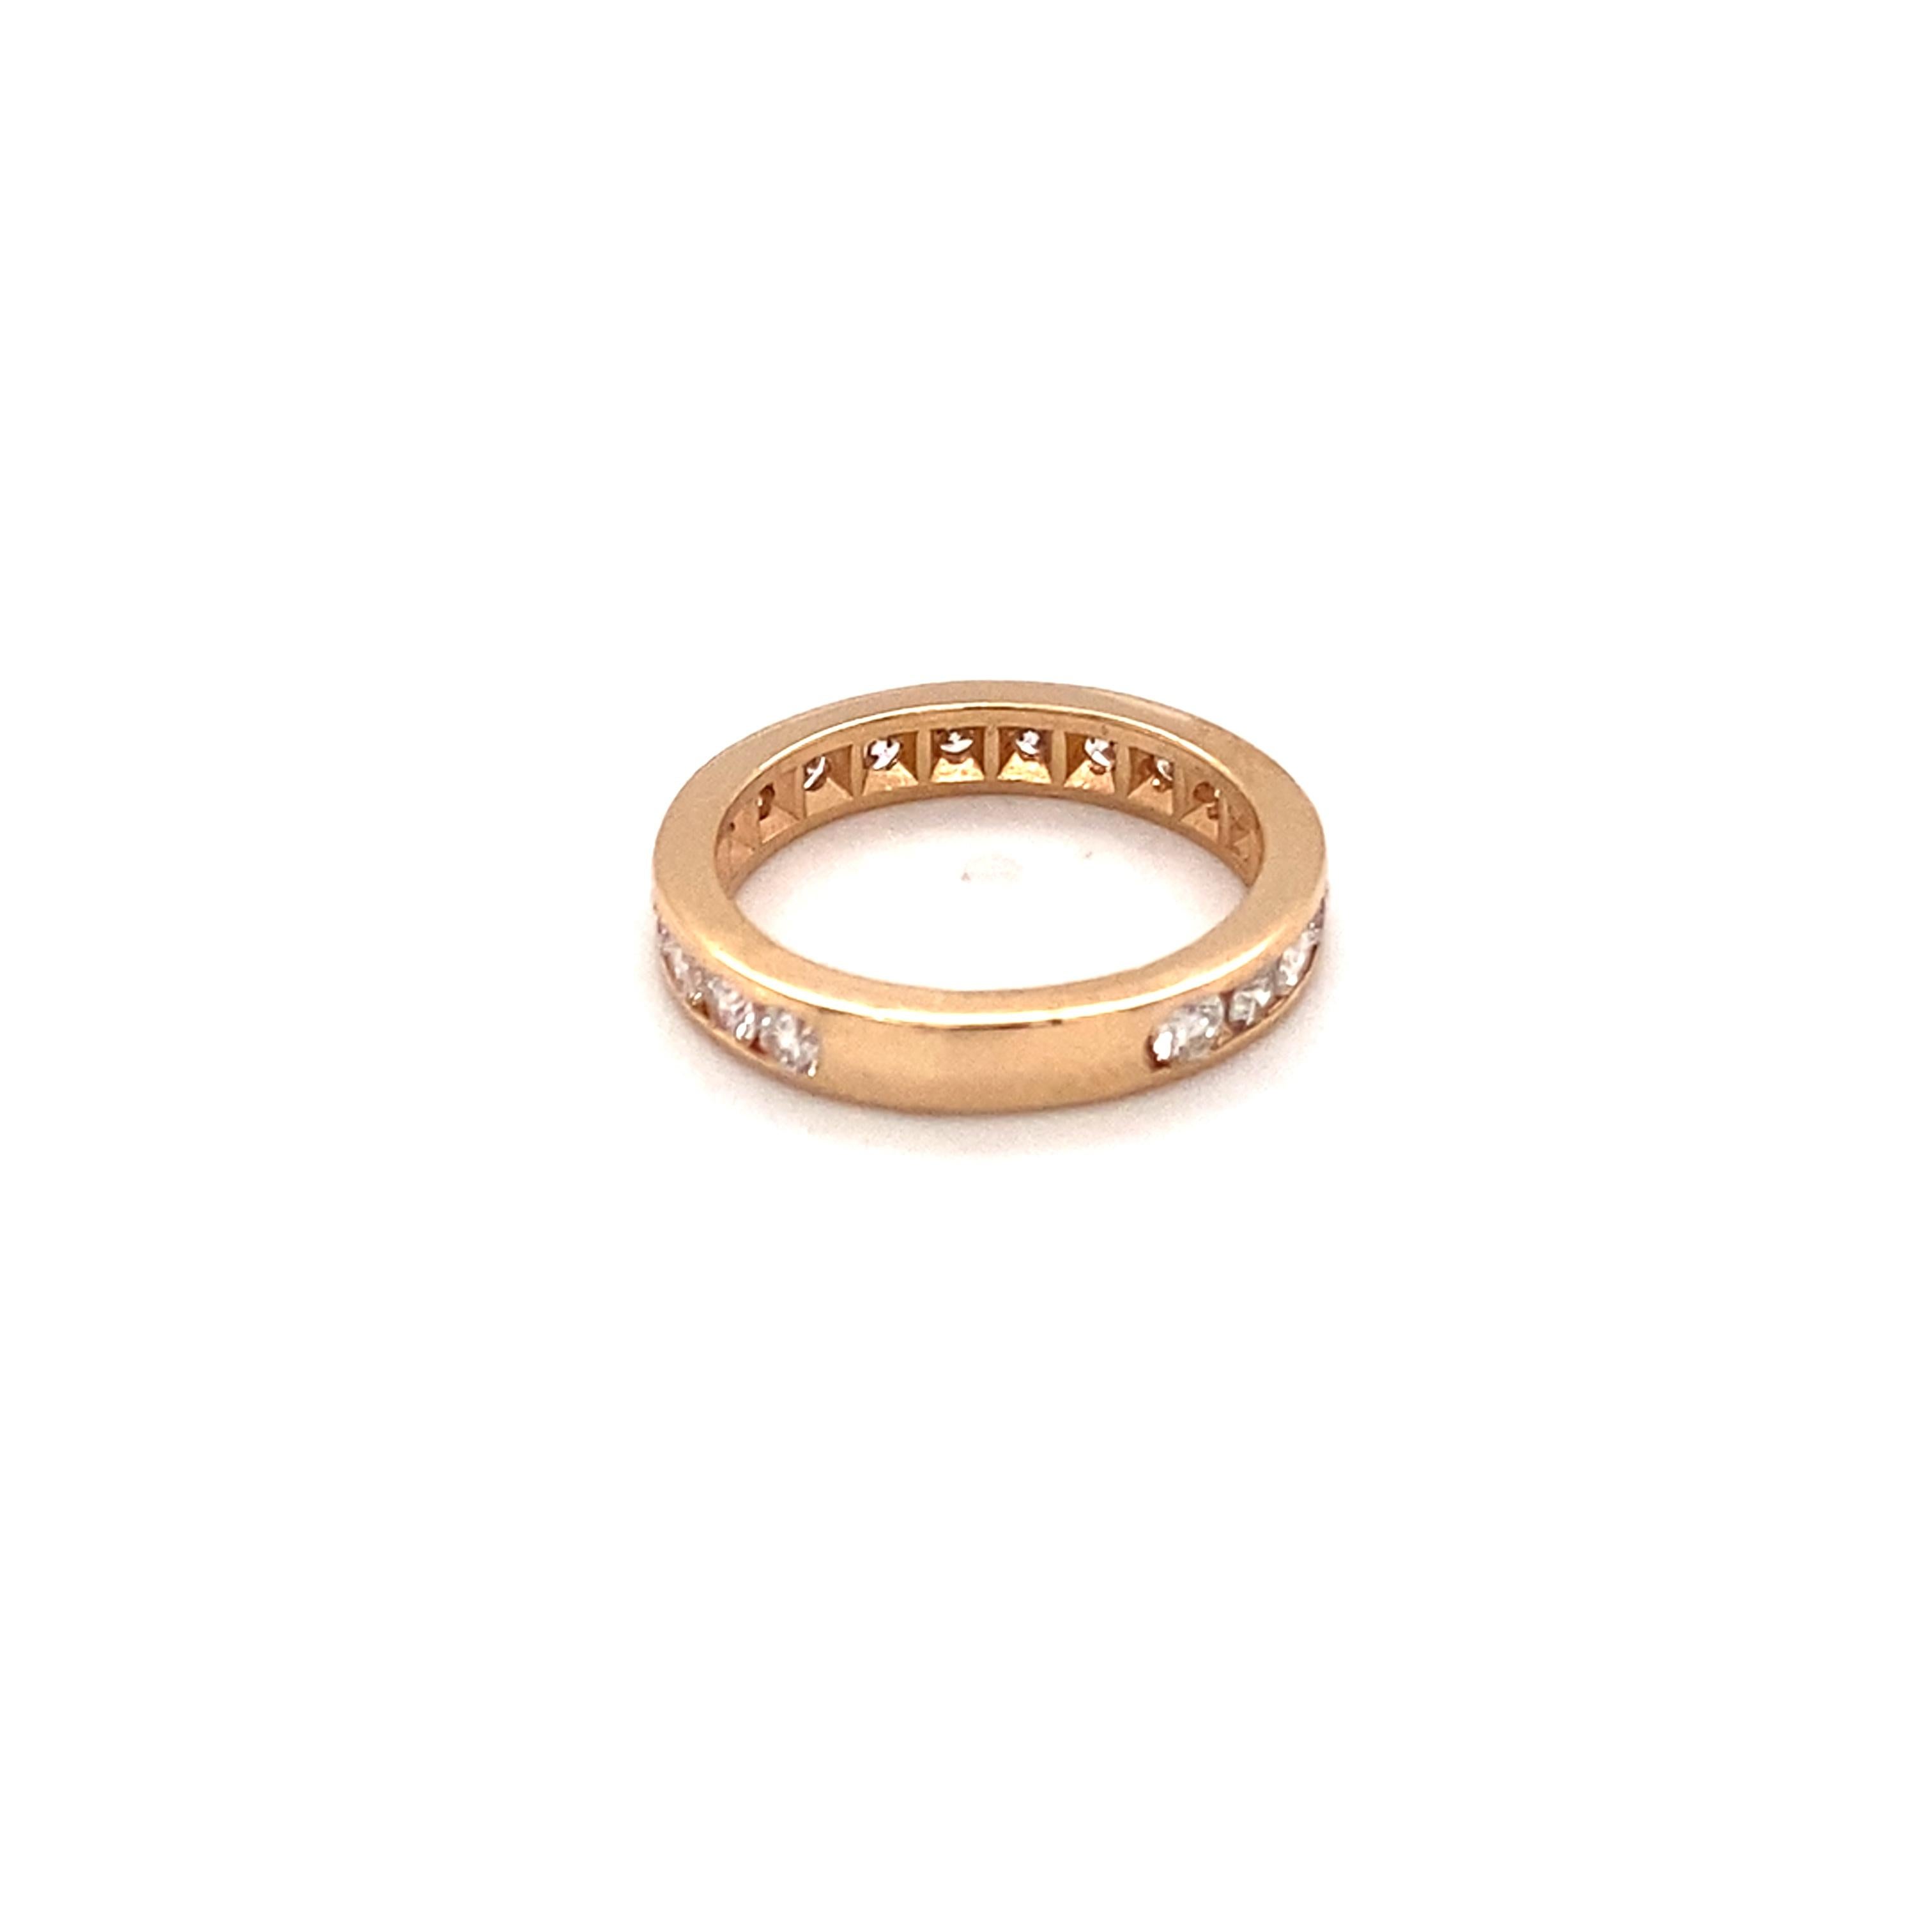 Item Details:
Metal Type: 18 Karat Yellow Gold
Weight: 3.3 grams
Size: 4.5 (can be sized up or down 1 size)

Diamond Details:
Cut: Round Brilliant
Carat: .60 Carat Total Weight 
Color: G-H
Clarity: VS-SI

Item Features:
This beautiful modern ring is